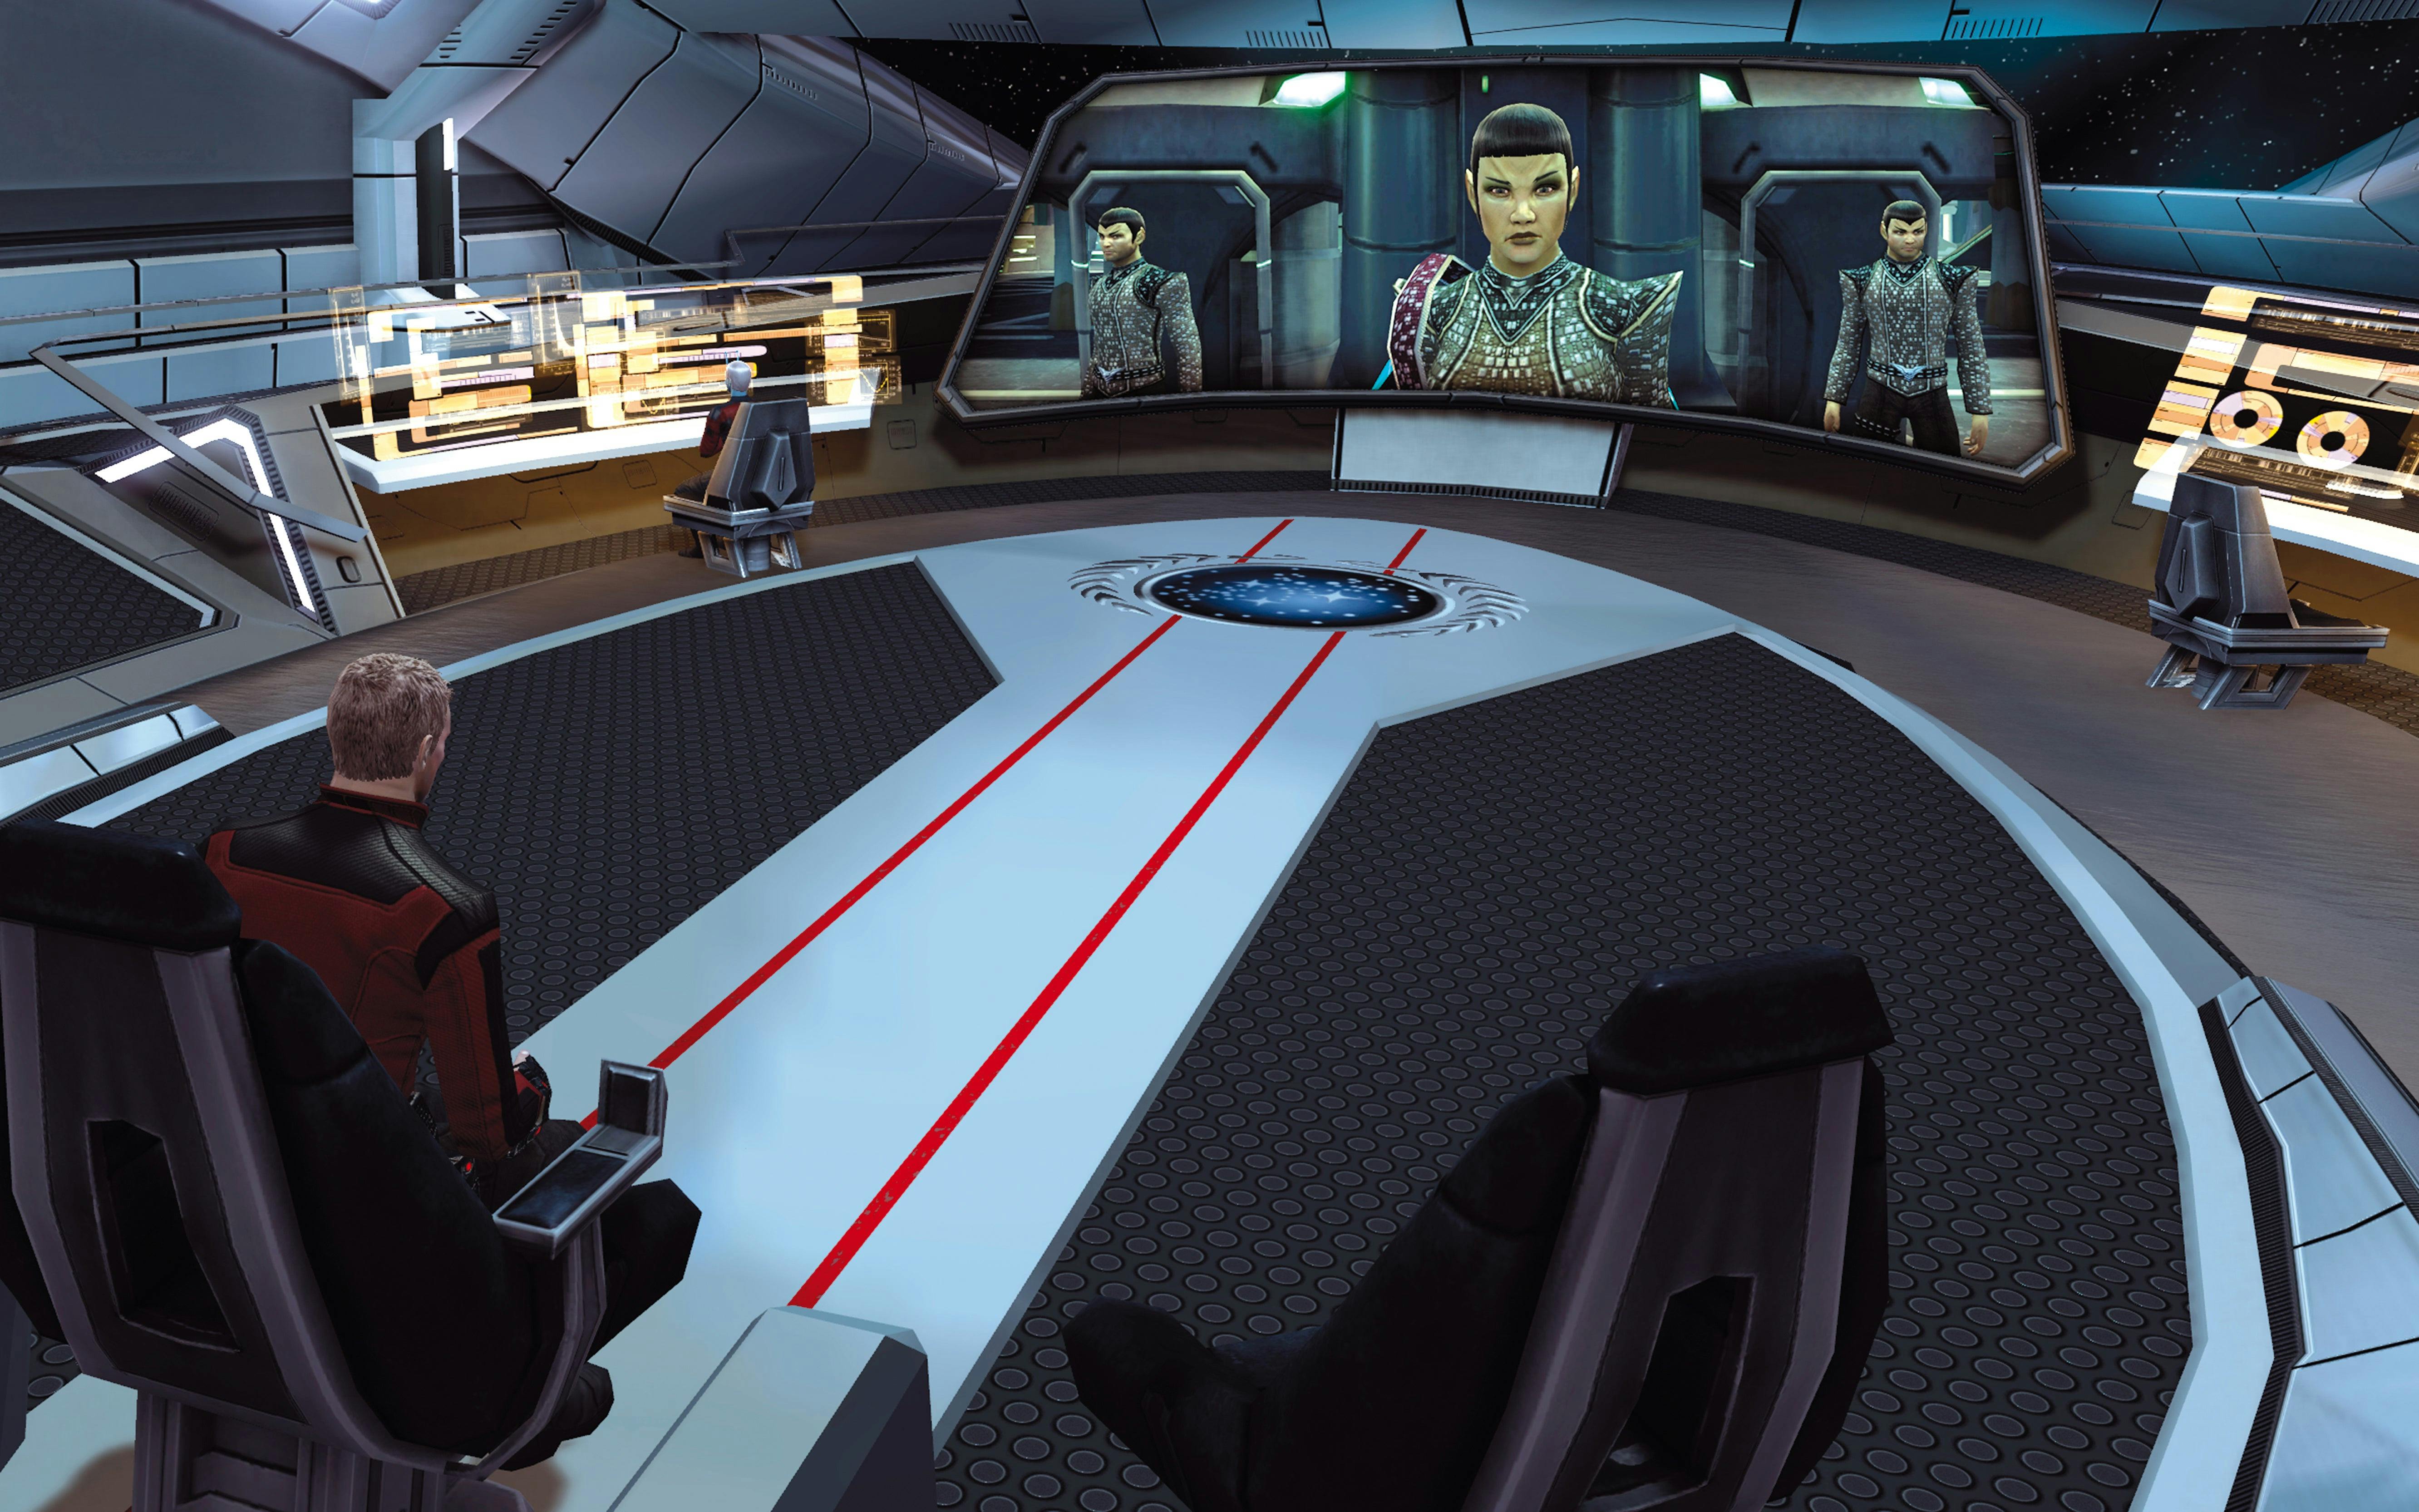 Commander Winters with his back to us looks at the 3 Romulans on the Enterprise’s viewscreen